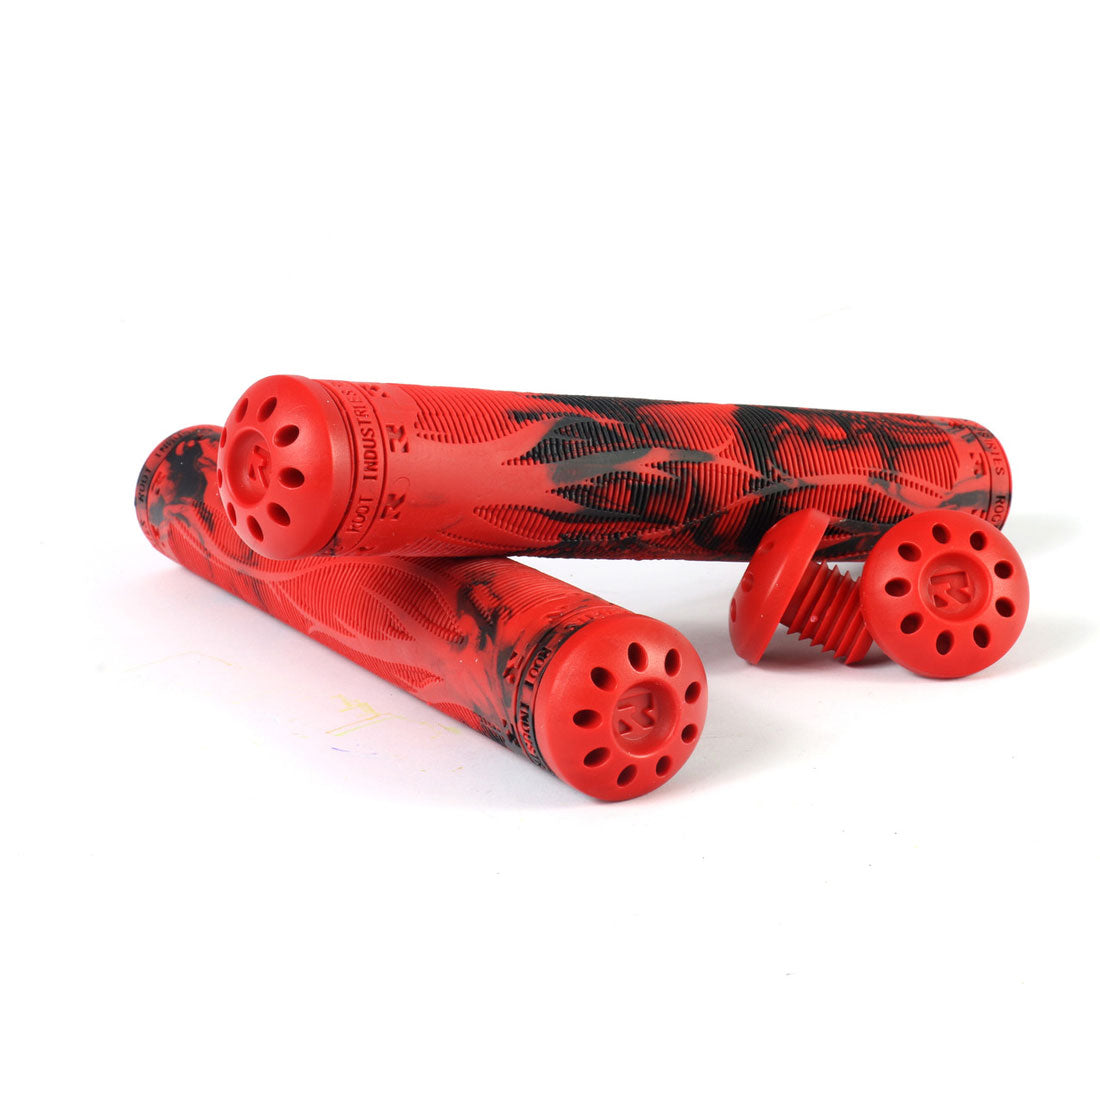 Root Industries R2 Air Grips - Red/Black Scooter Grips